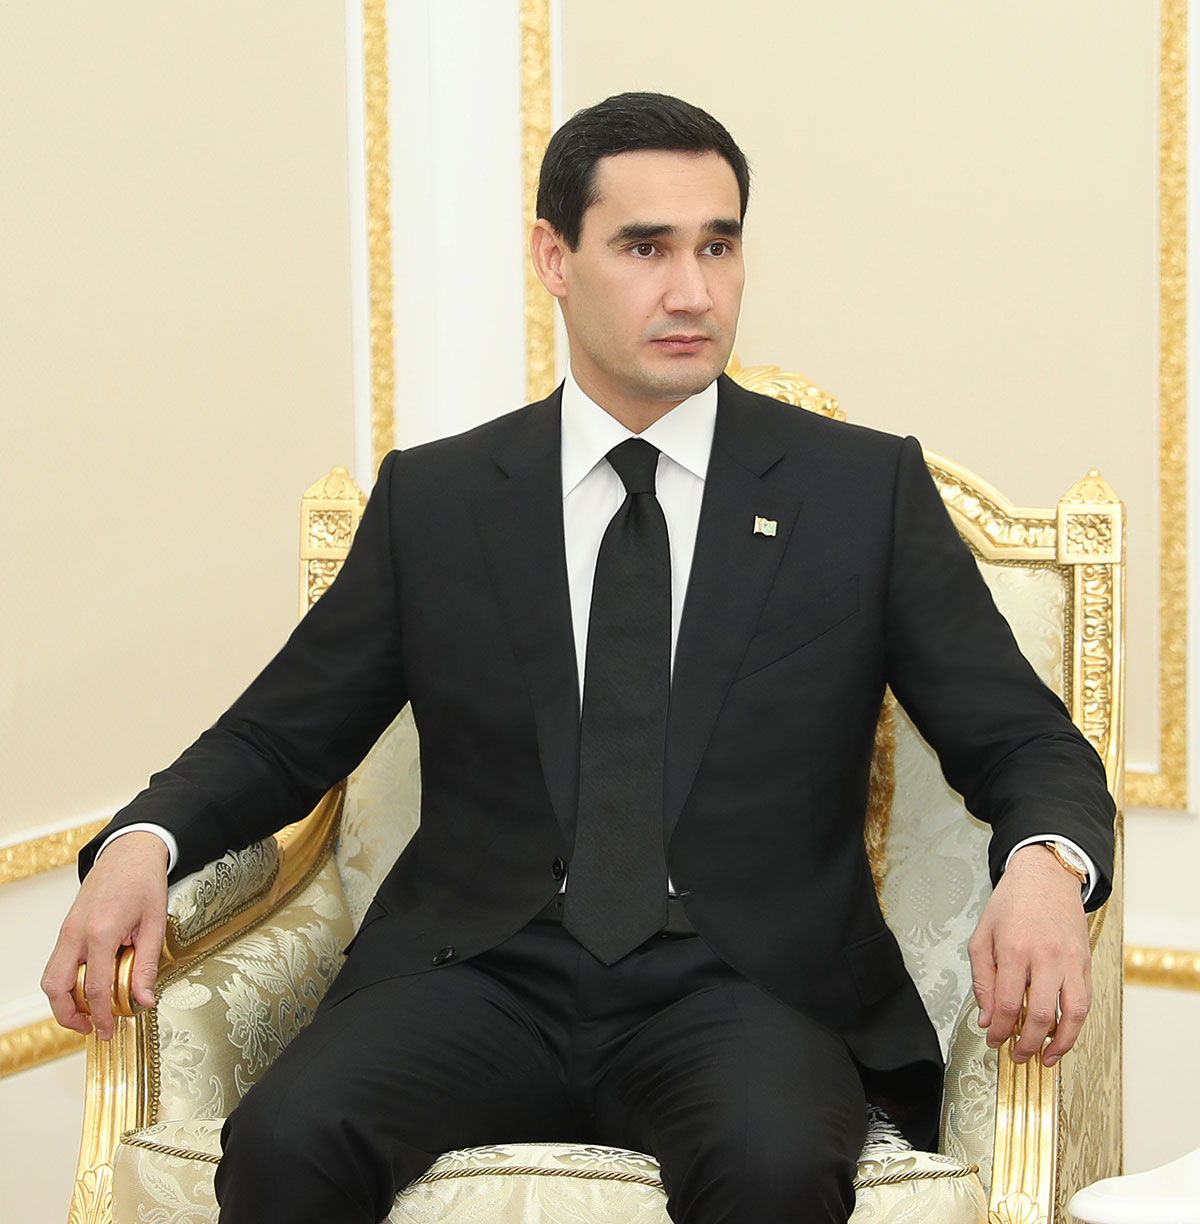 The President of Turkmenistan received the head of VINCI Construction Grands Projets